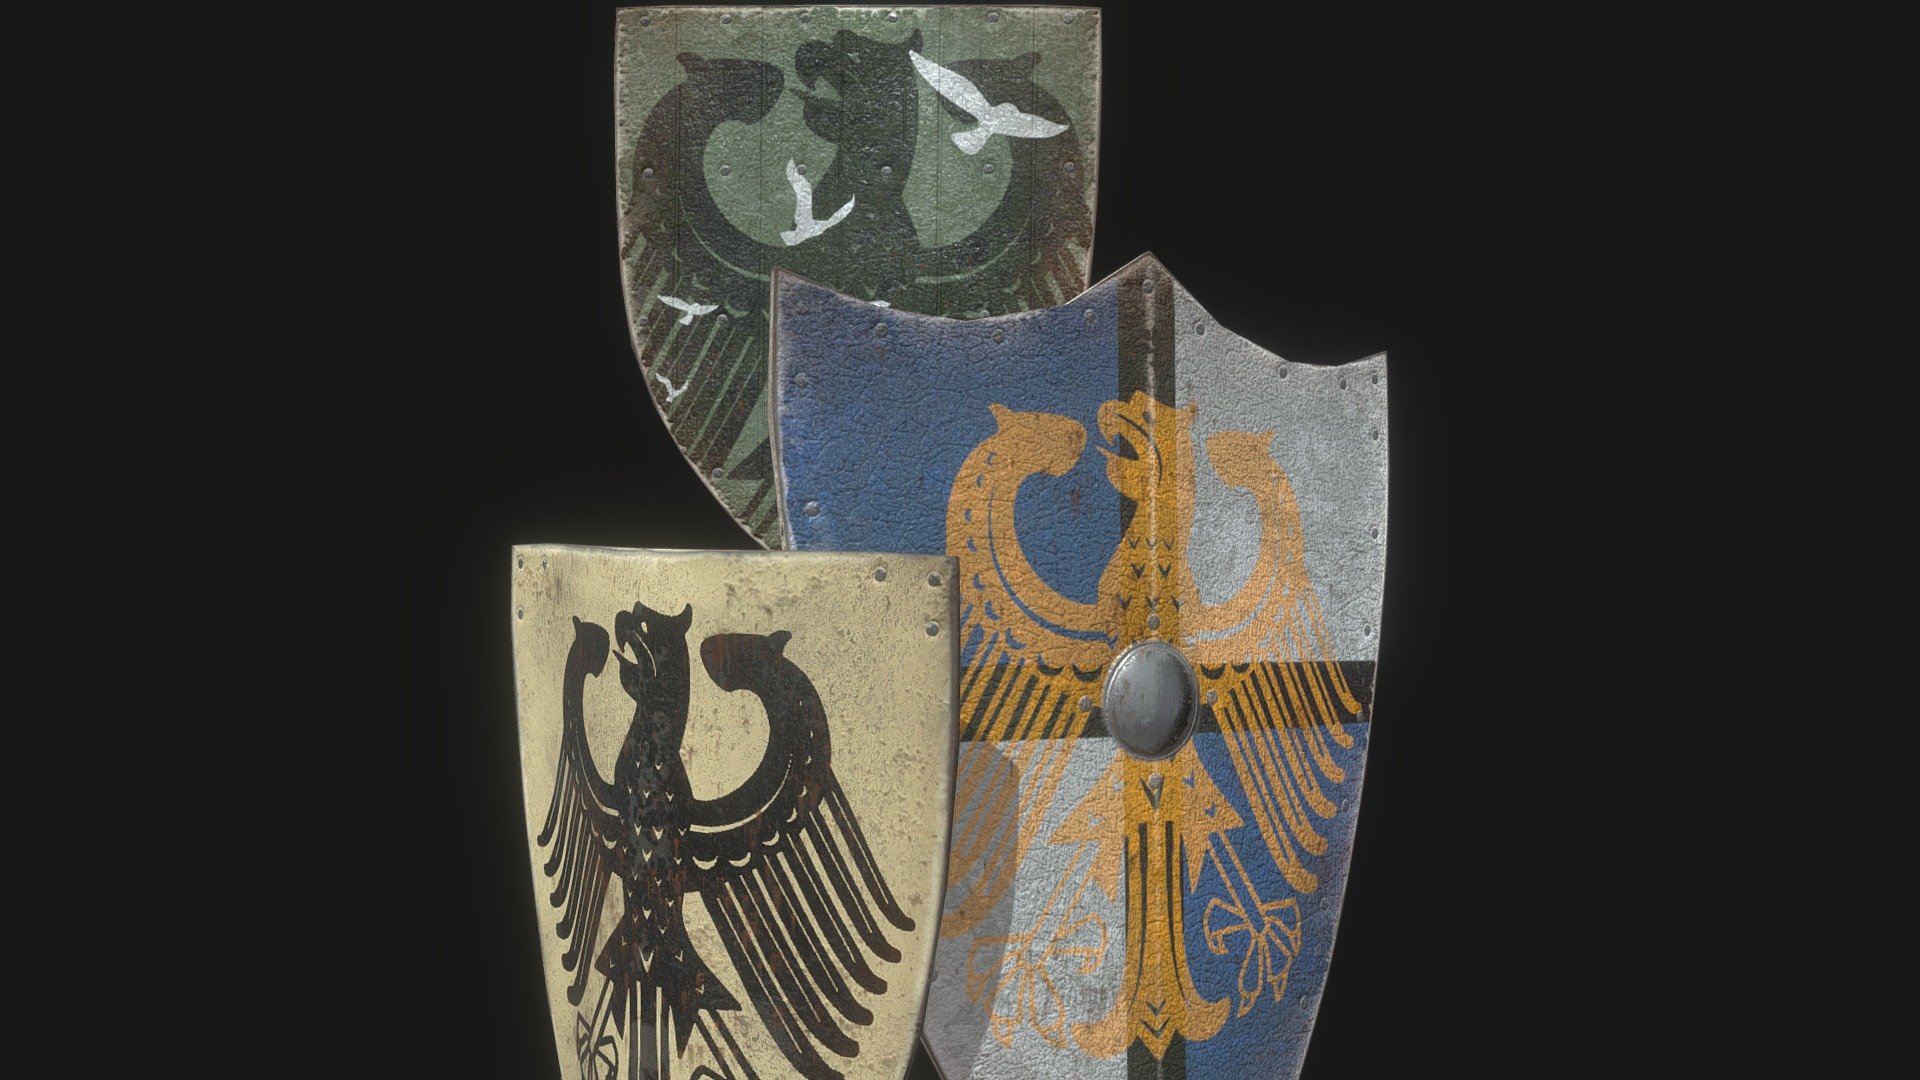 A set of Medieval Kite Shields crested with an Eagle!

If you buy any of my medieval Kite shields, the texture sets are interchangeable across all 4 models!

Designed for games in Low-poly PBR including Albedo, Normal, Metallic, AO, and Roughness 4K textures.

Horned Kite - 568 Triangles.
Flattop Kite - 496 Triangles.
Wooden Small Kite - 532 Triangles 3d model